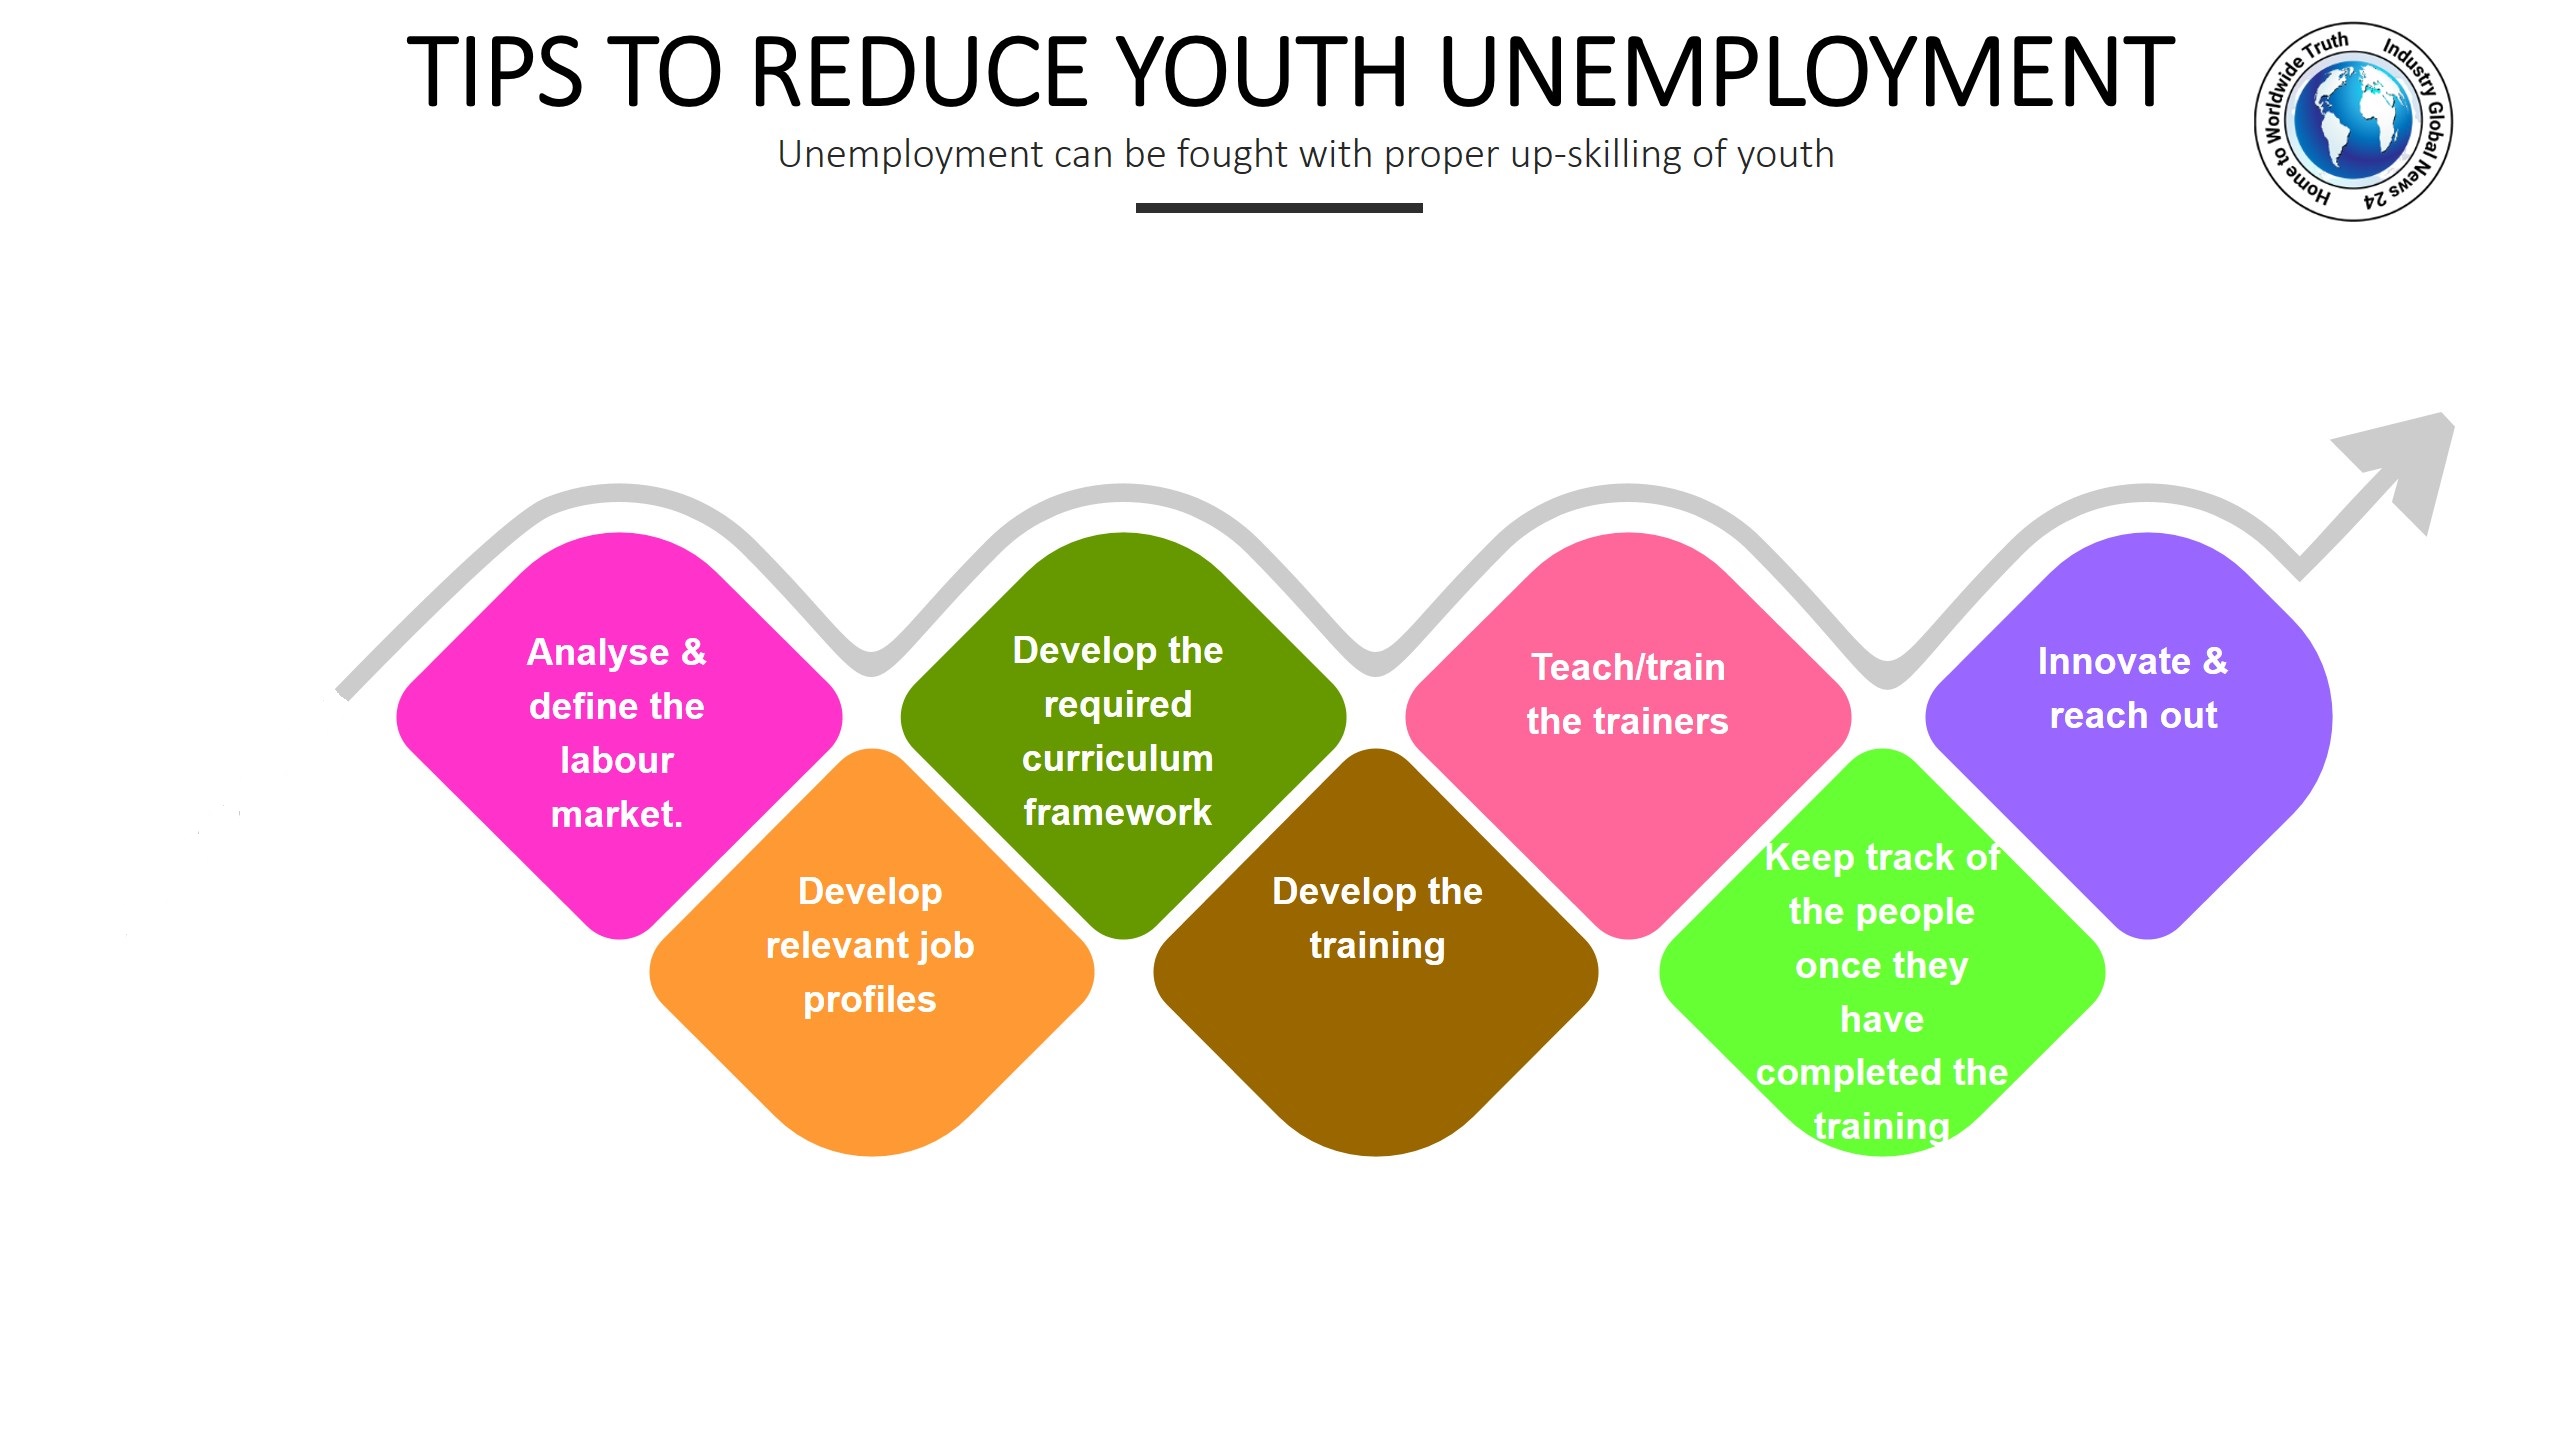 Tips to reduce youth unemployment